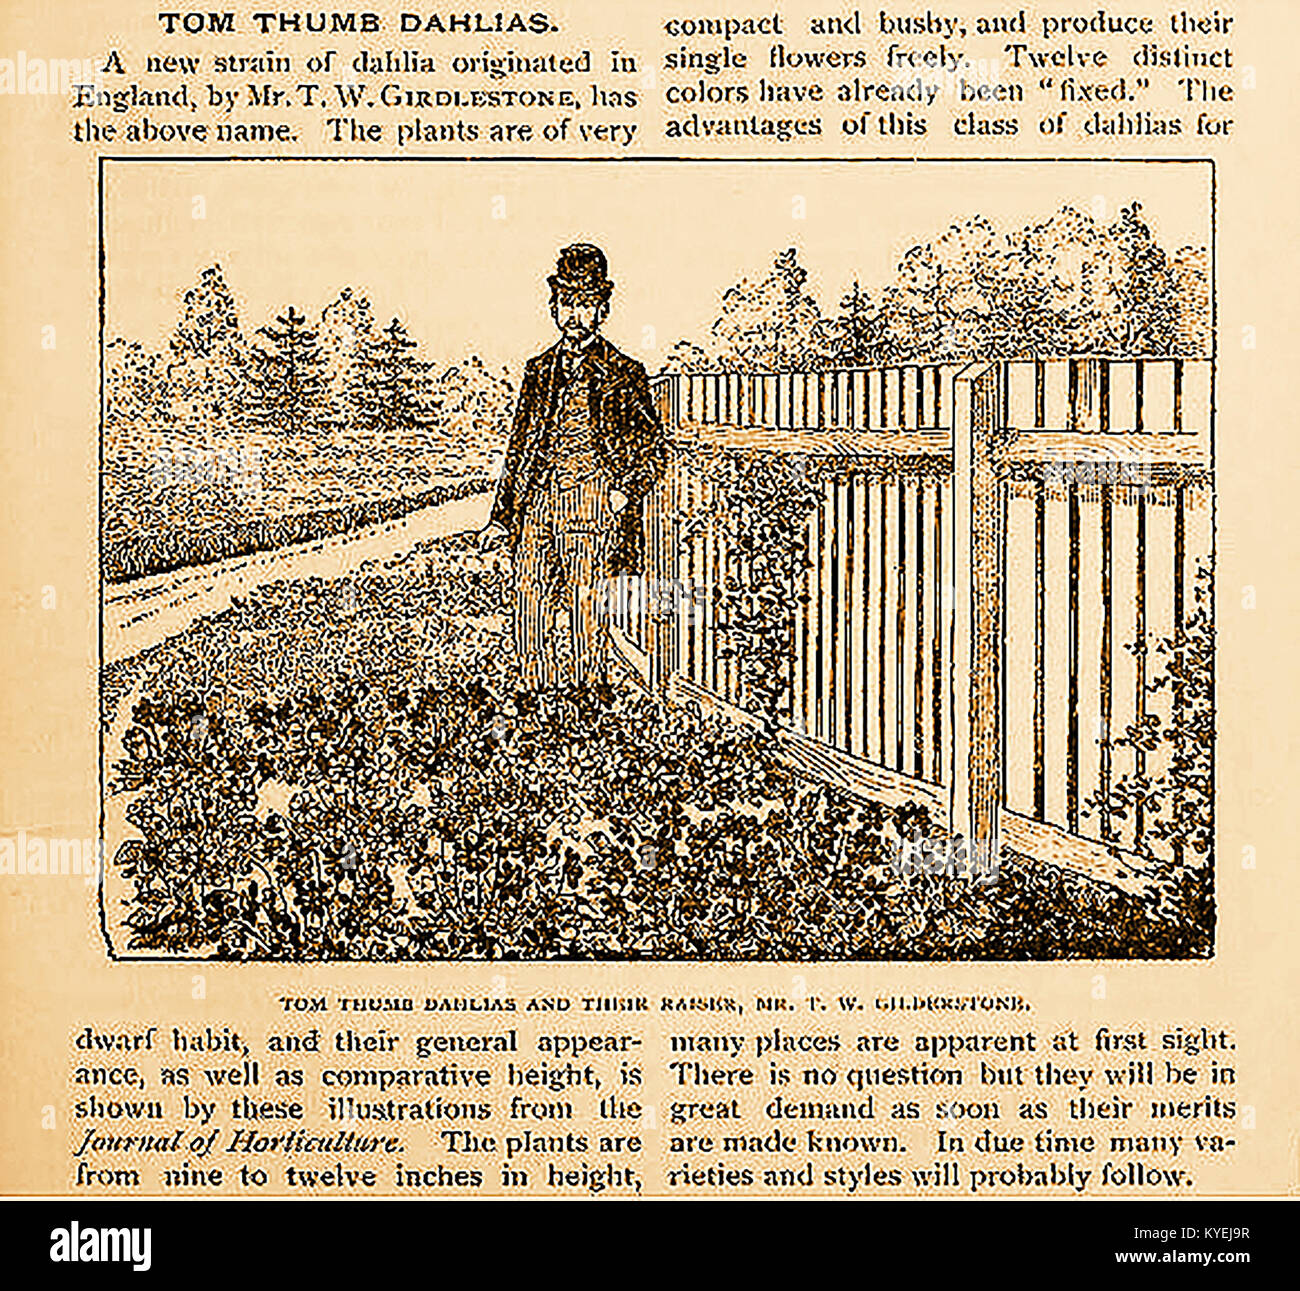 A portrait of British horticulturalist  T W Gilderstone (also printed as Girdlestone) and the Tom Thumb dahlias he developed. A press cutting from Vicks Magazine.USA 1878.  His stocks were marketed by  Messrs. J. Cheal & Sons, of Crawley  England in 1880 and were temporarily  named 'Tom Pouce' (1891) and re-modified  as Coltness Gem 1918. Stock Photo